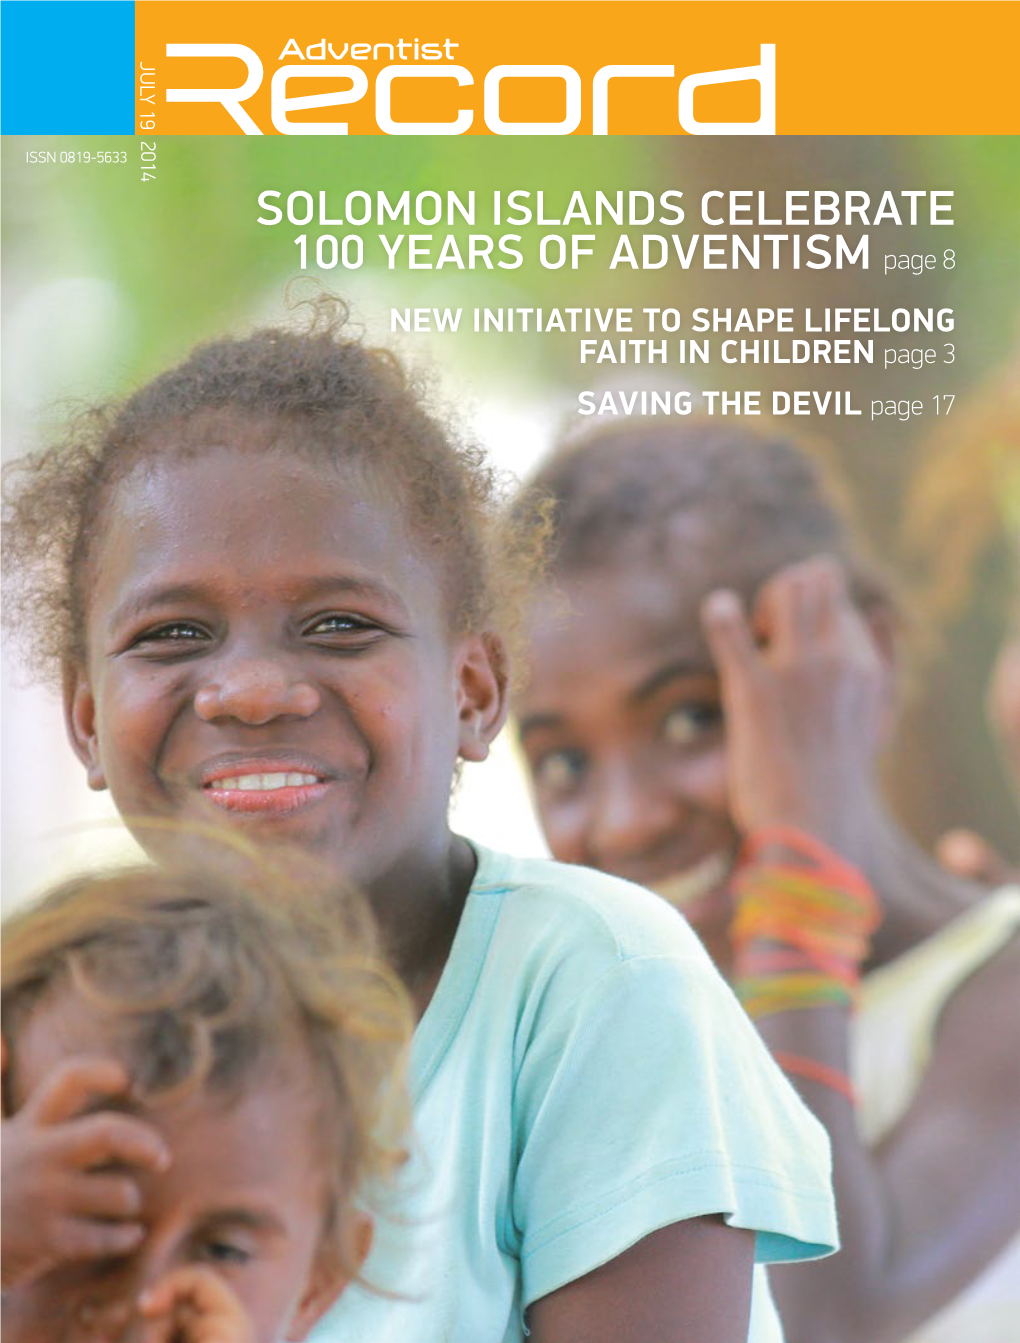 SOLOMON ISLANDS CELEBRATE 100 YEARS of ADVENTISM Page 8